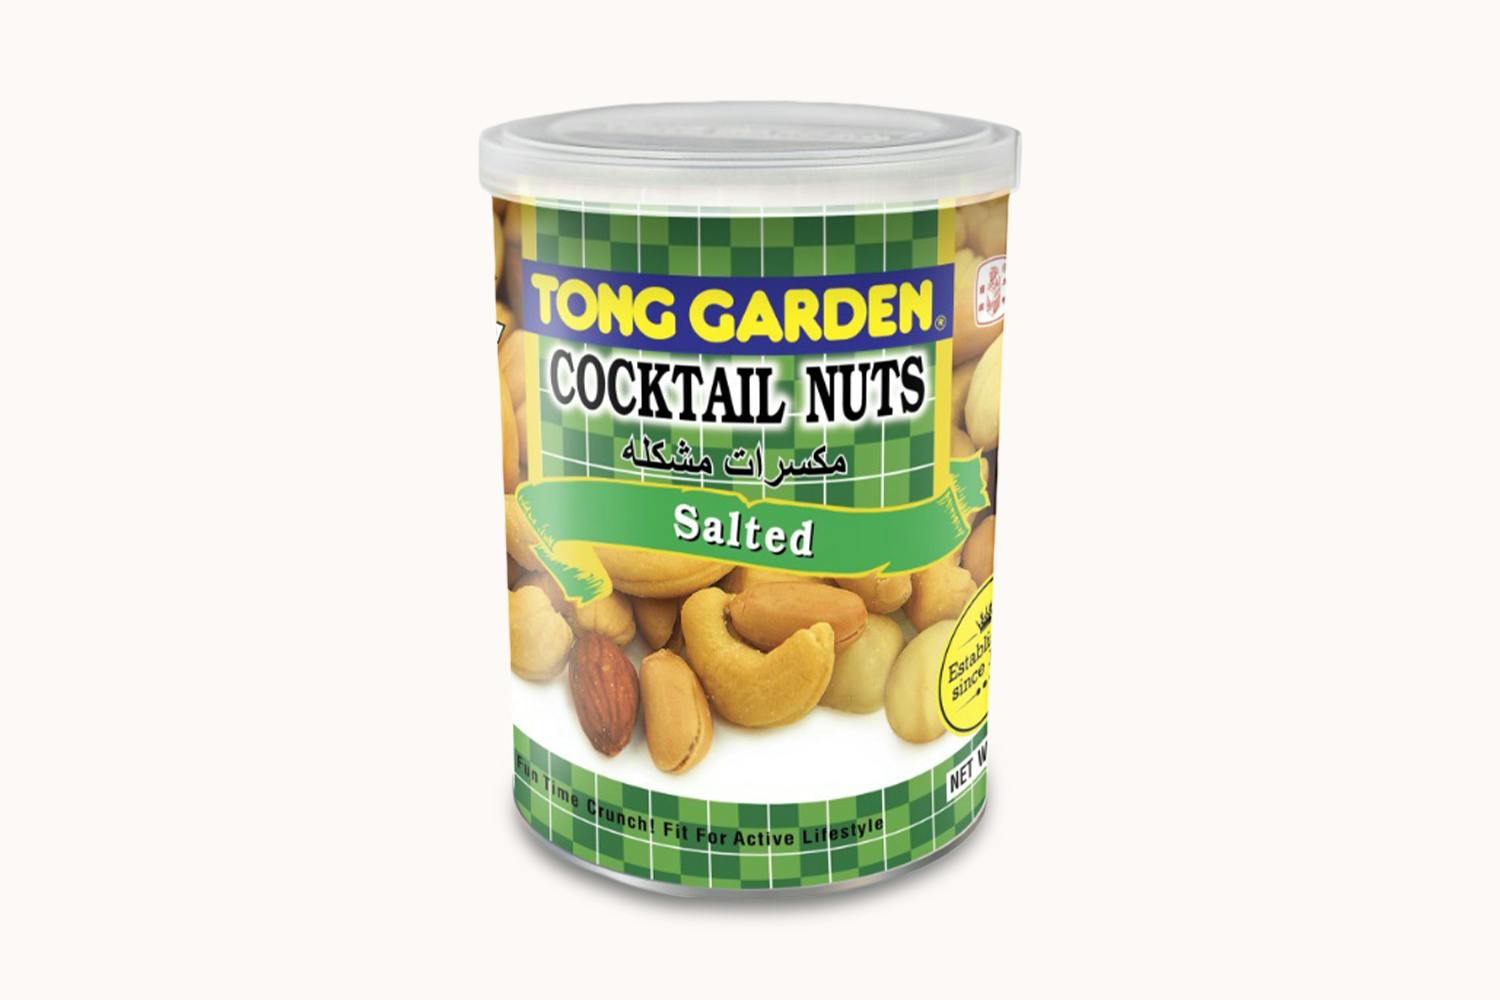 Tong Garden Cocktail Nuts - Salted